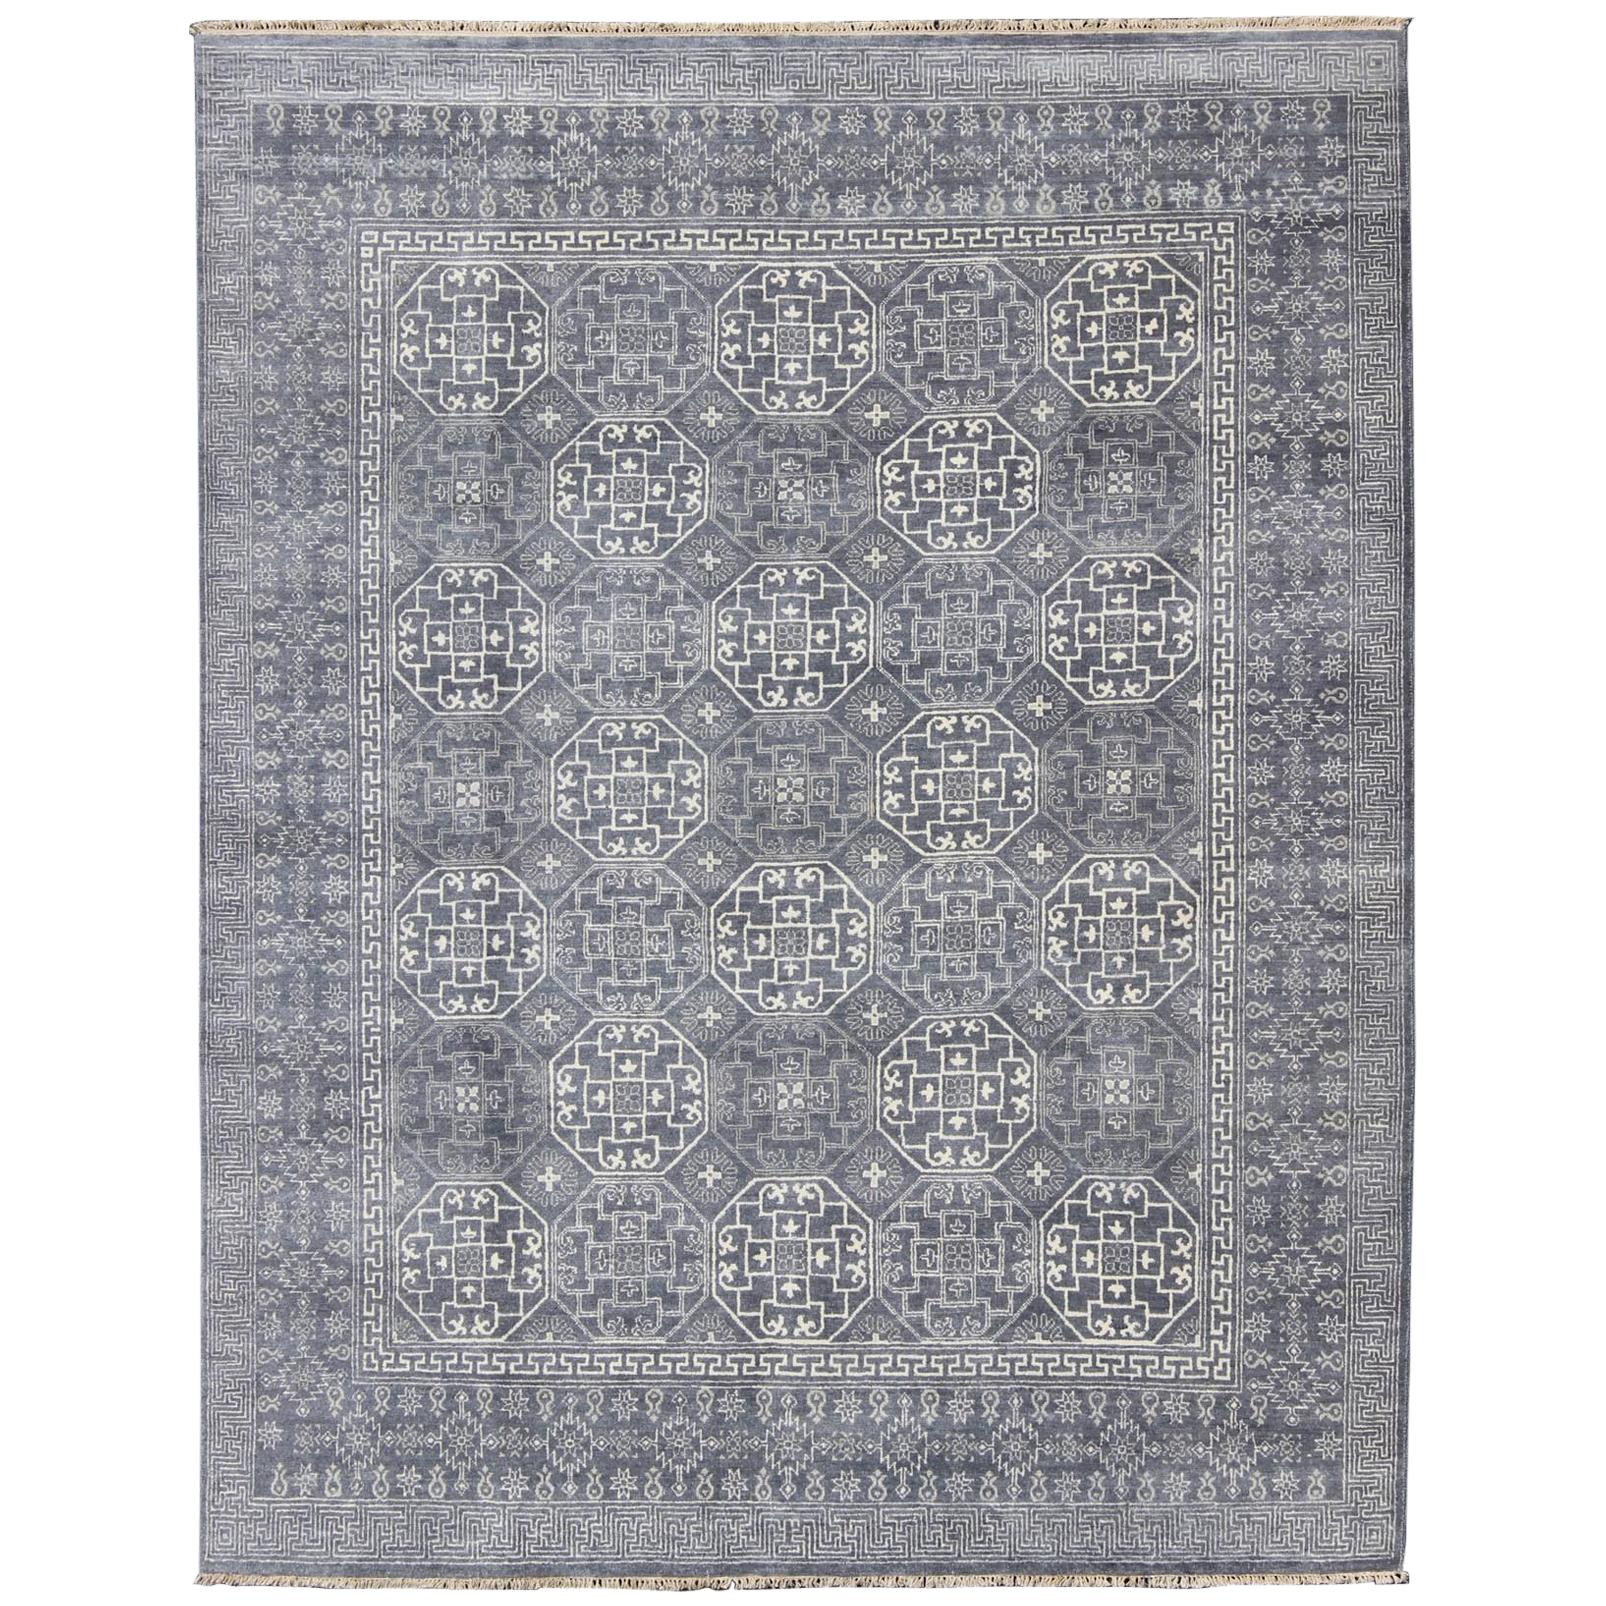 Antique Reproduction Indian Khotan Rug in Shades of Gray and Blue For Sale